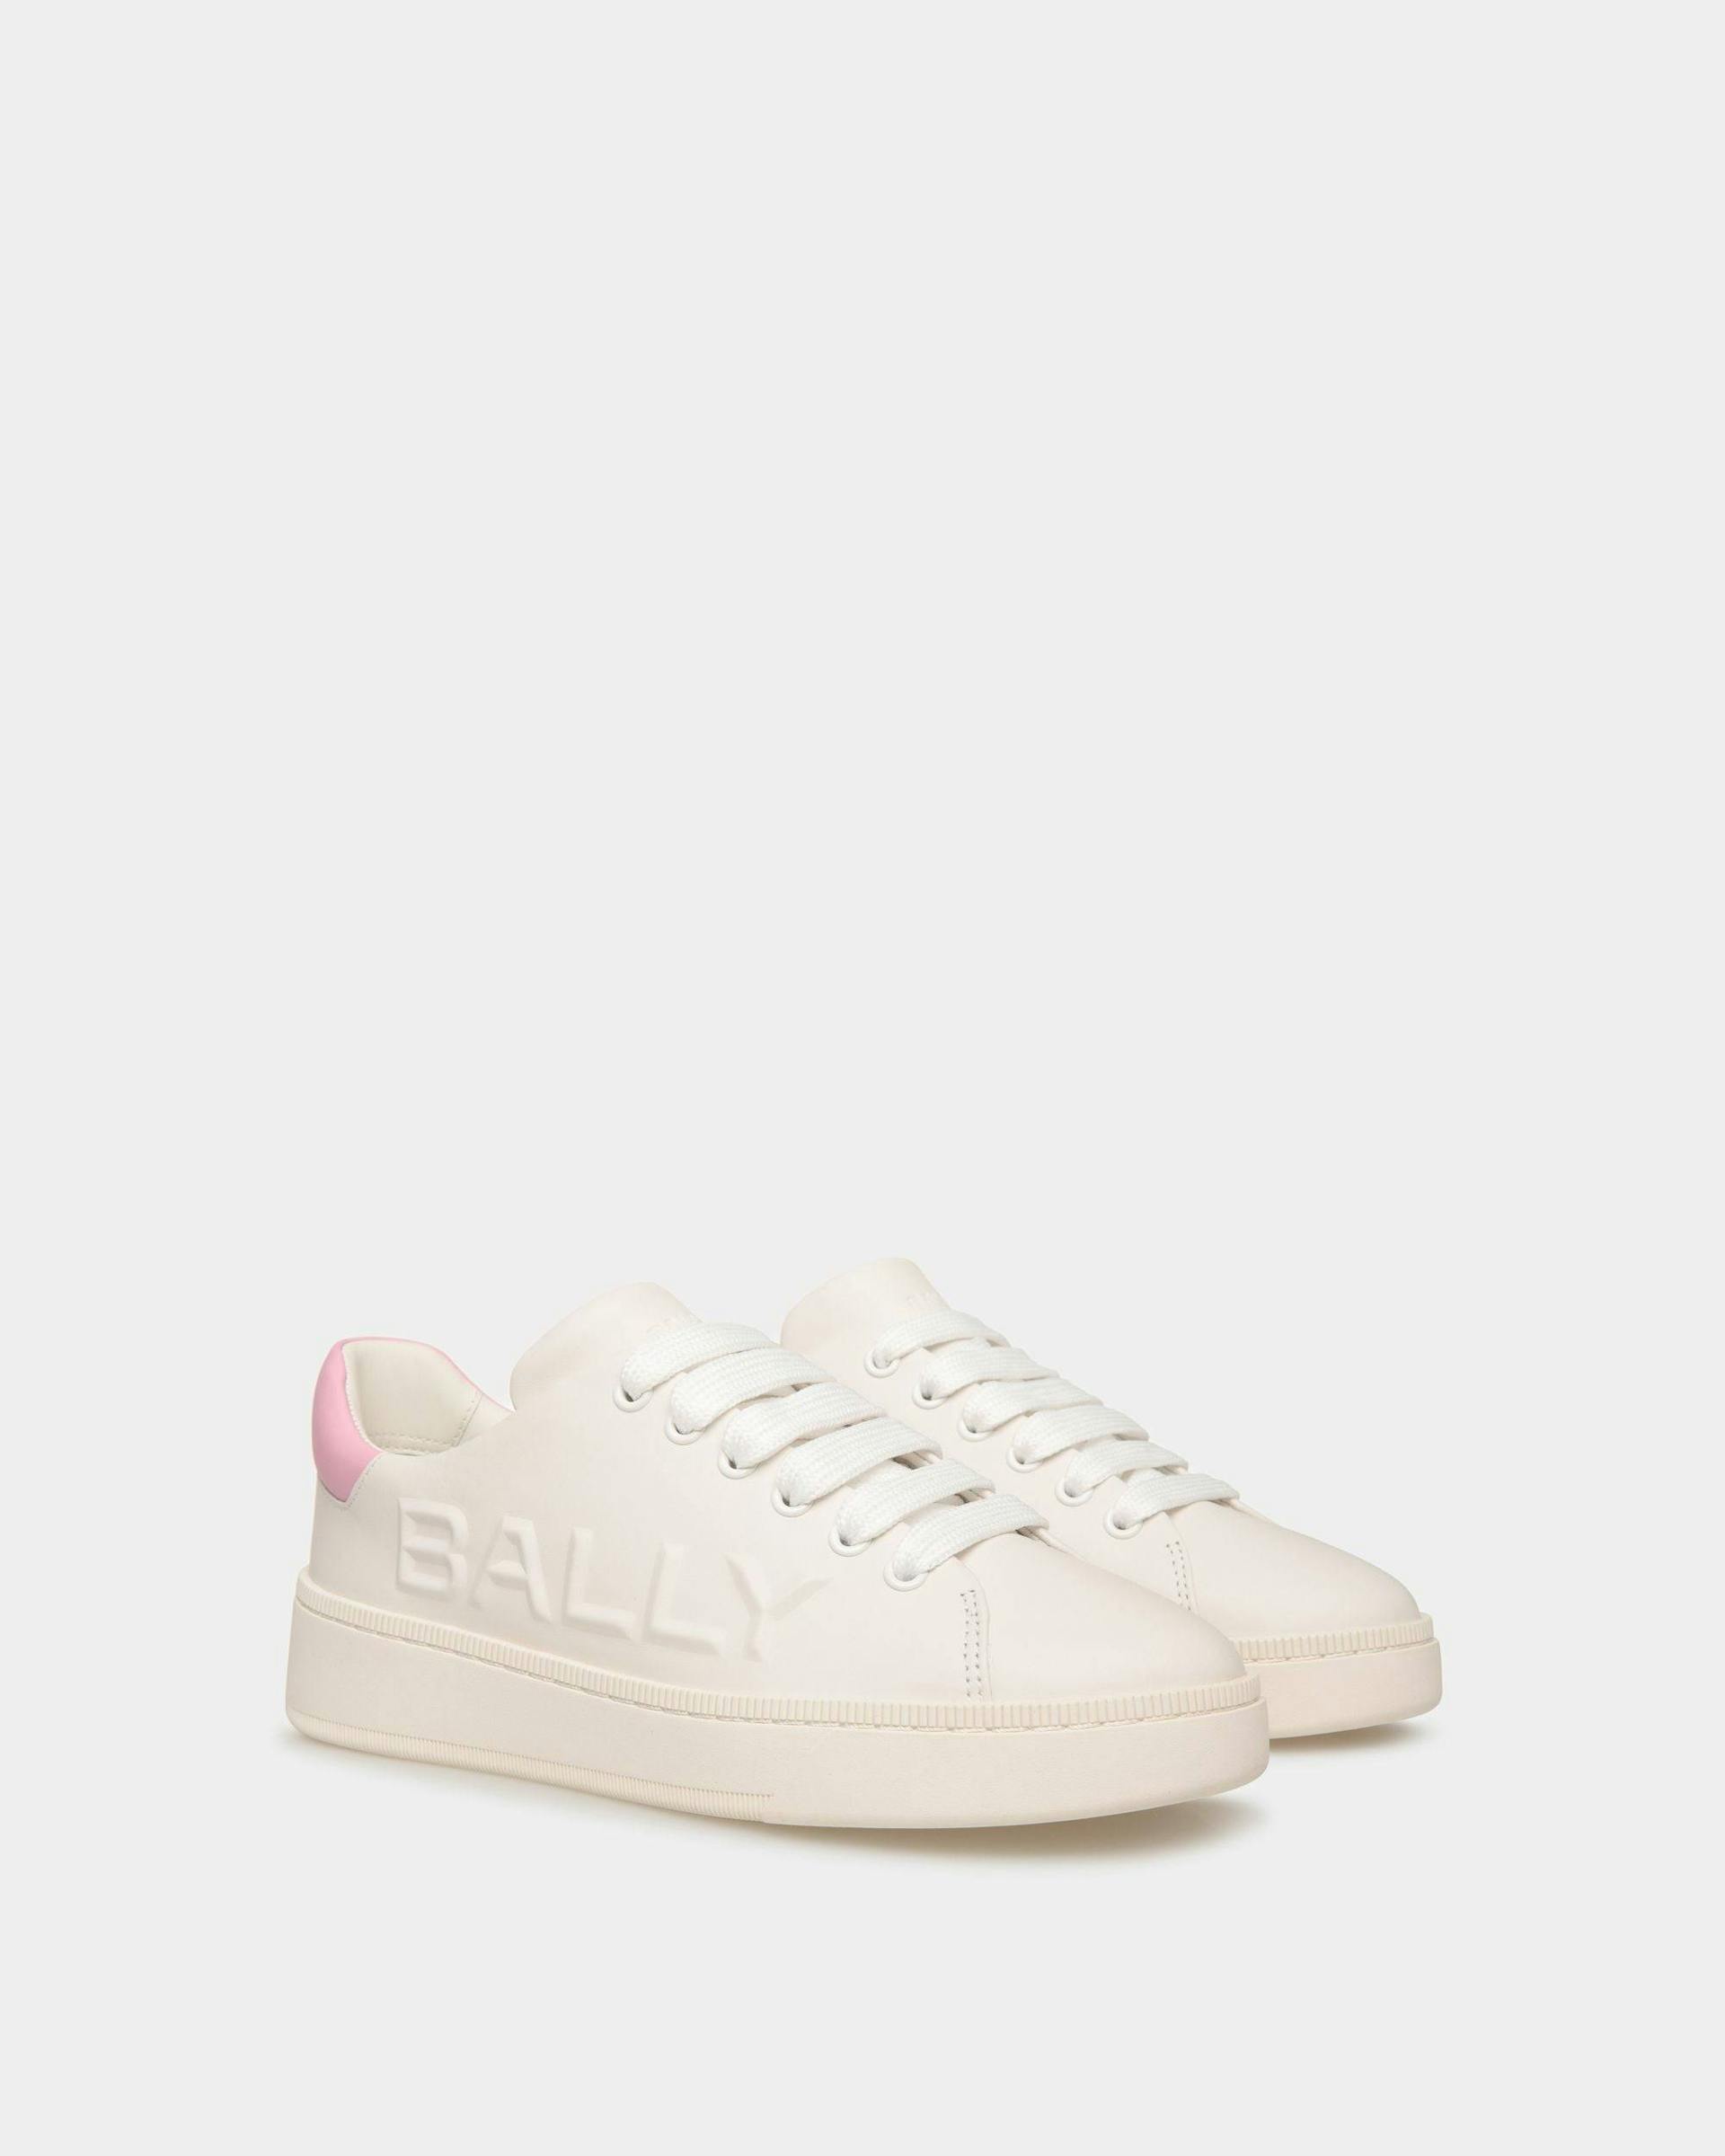 Women's Raise Sneaker In White And Pink Leather | Bally | Still Life 3/4 Front